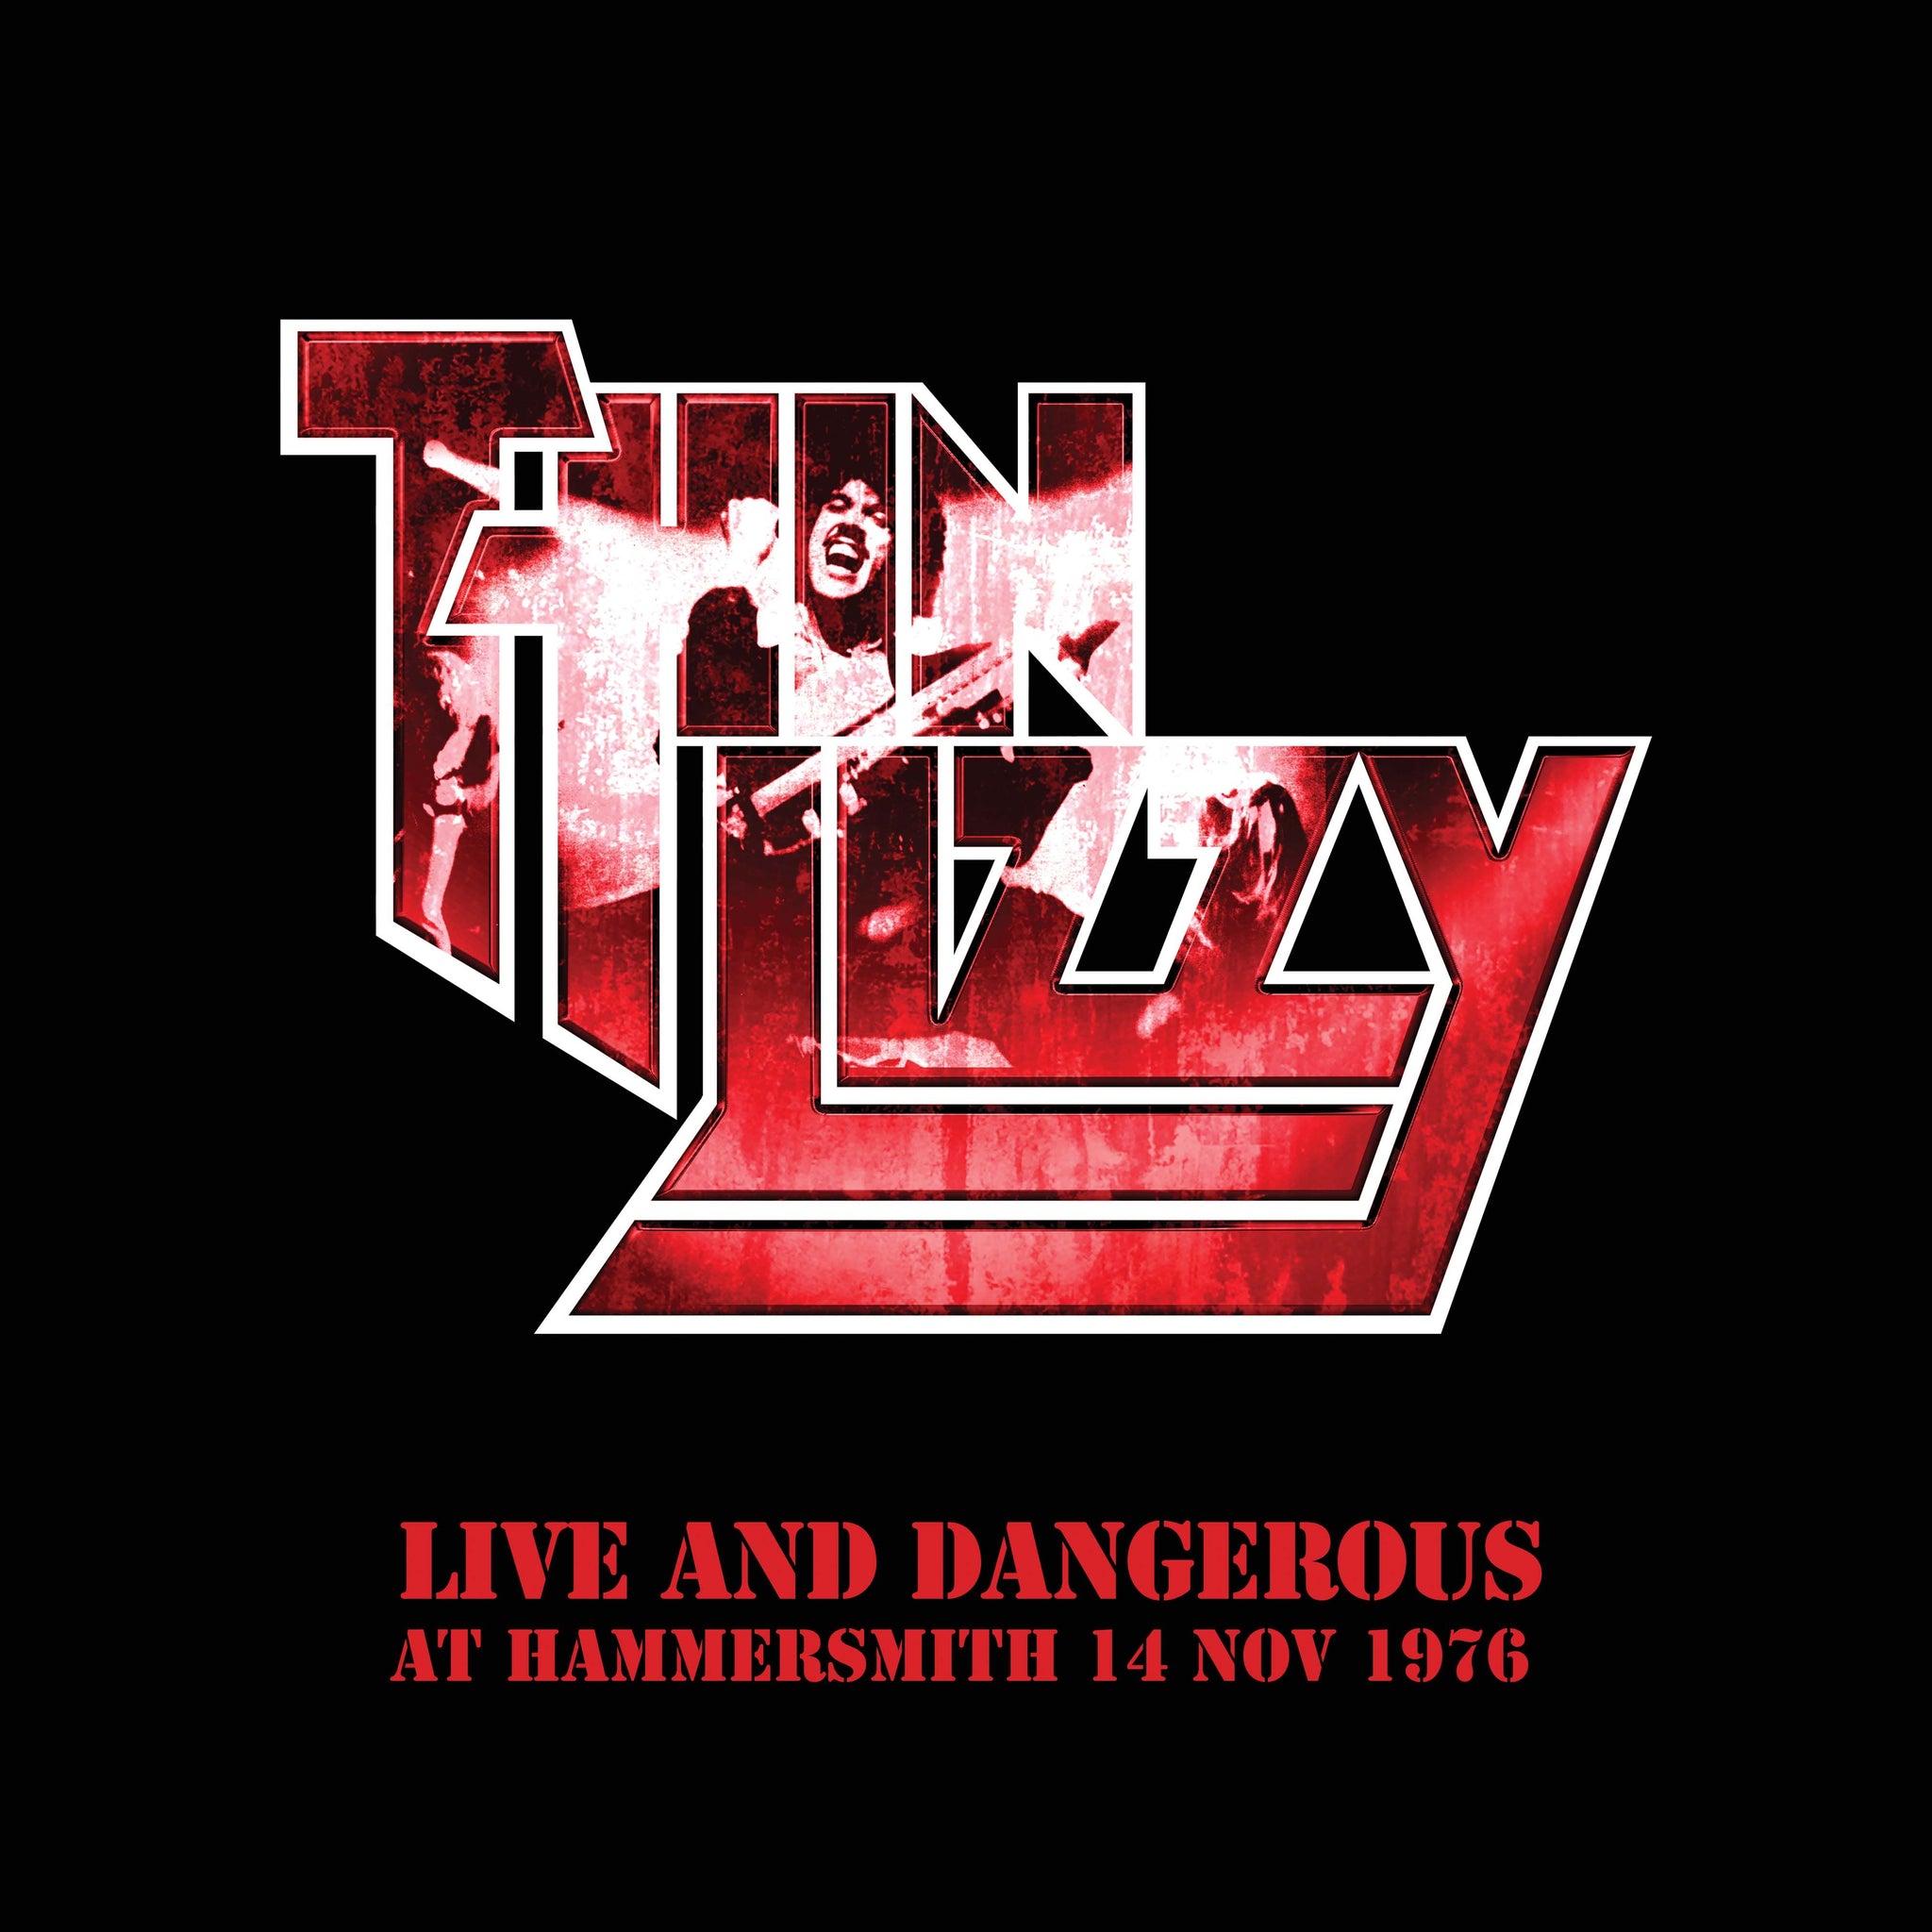 THIN LIZZY - Live and Dangerous – Hammersmith 14/11/1986 - 2LP - Vinyl [RSD23]